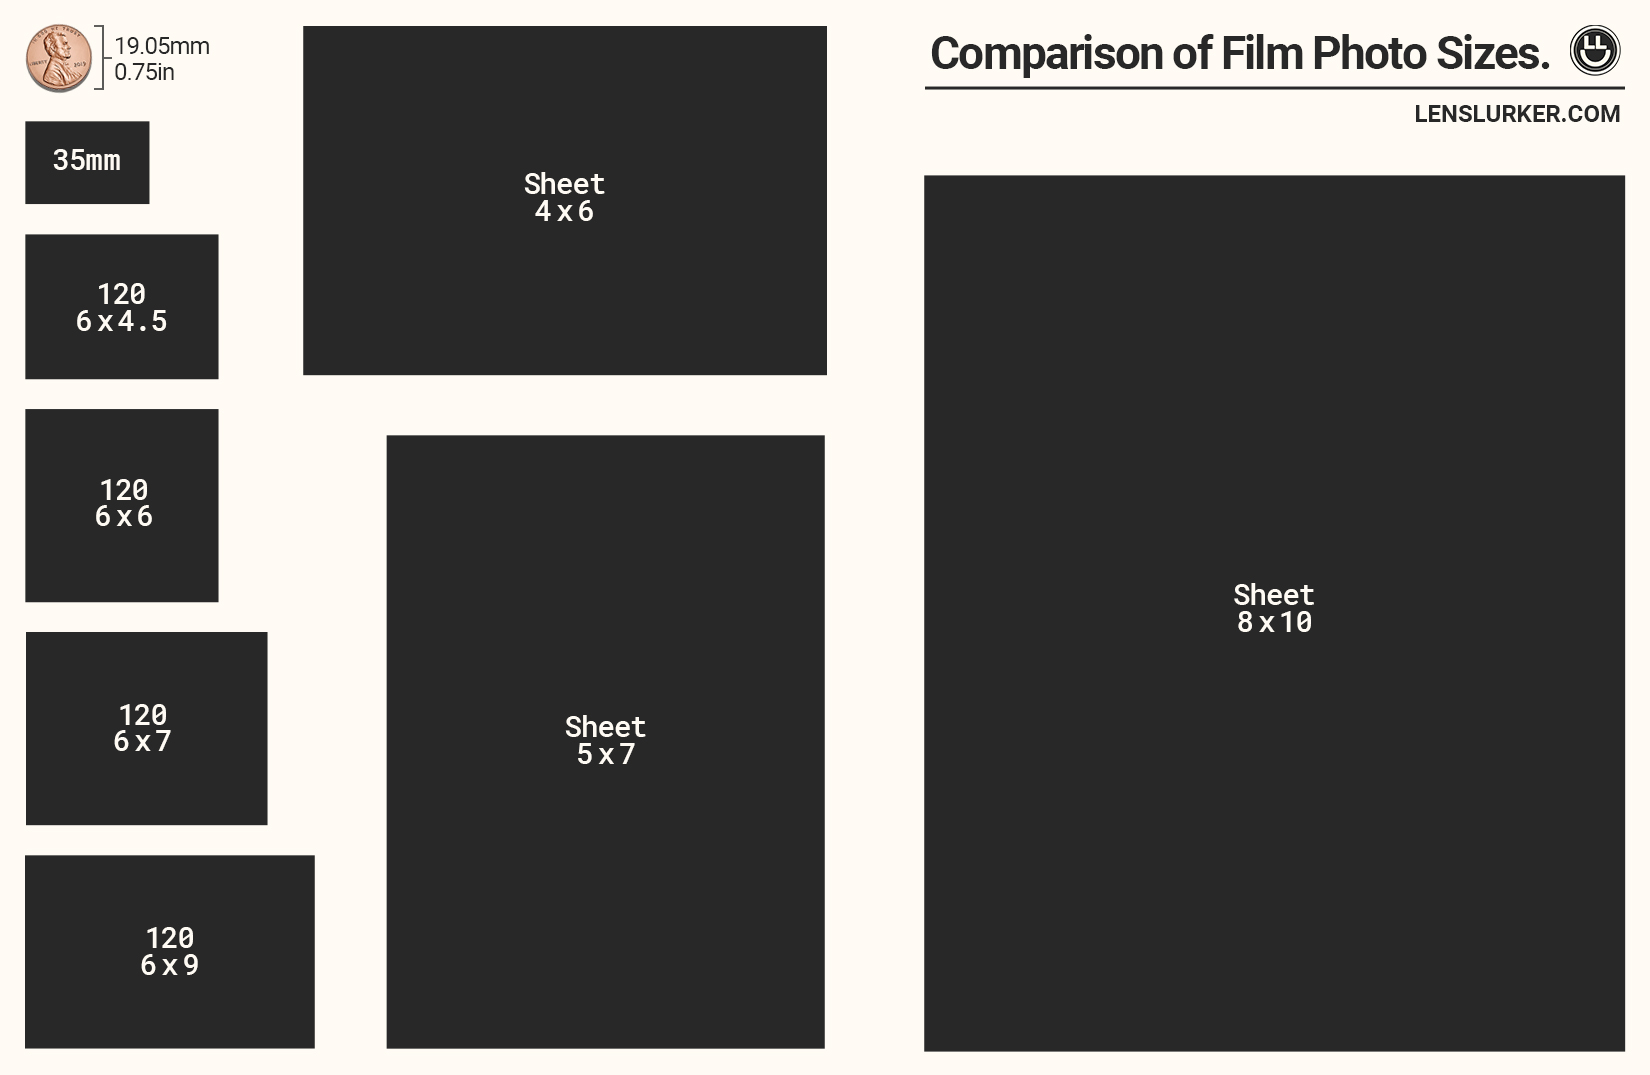 Comparison of the different film photo sizes.